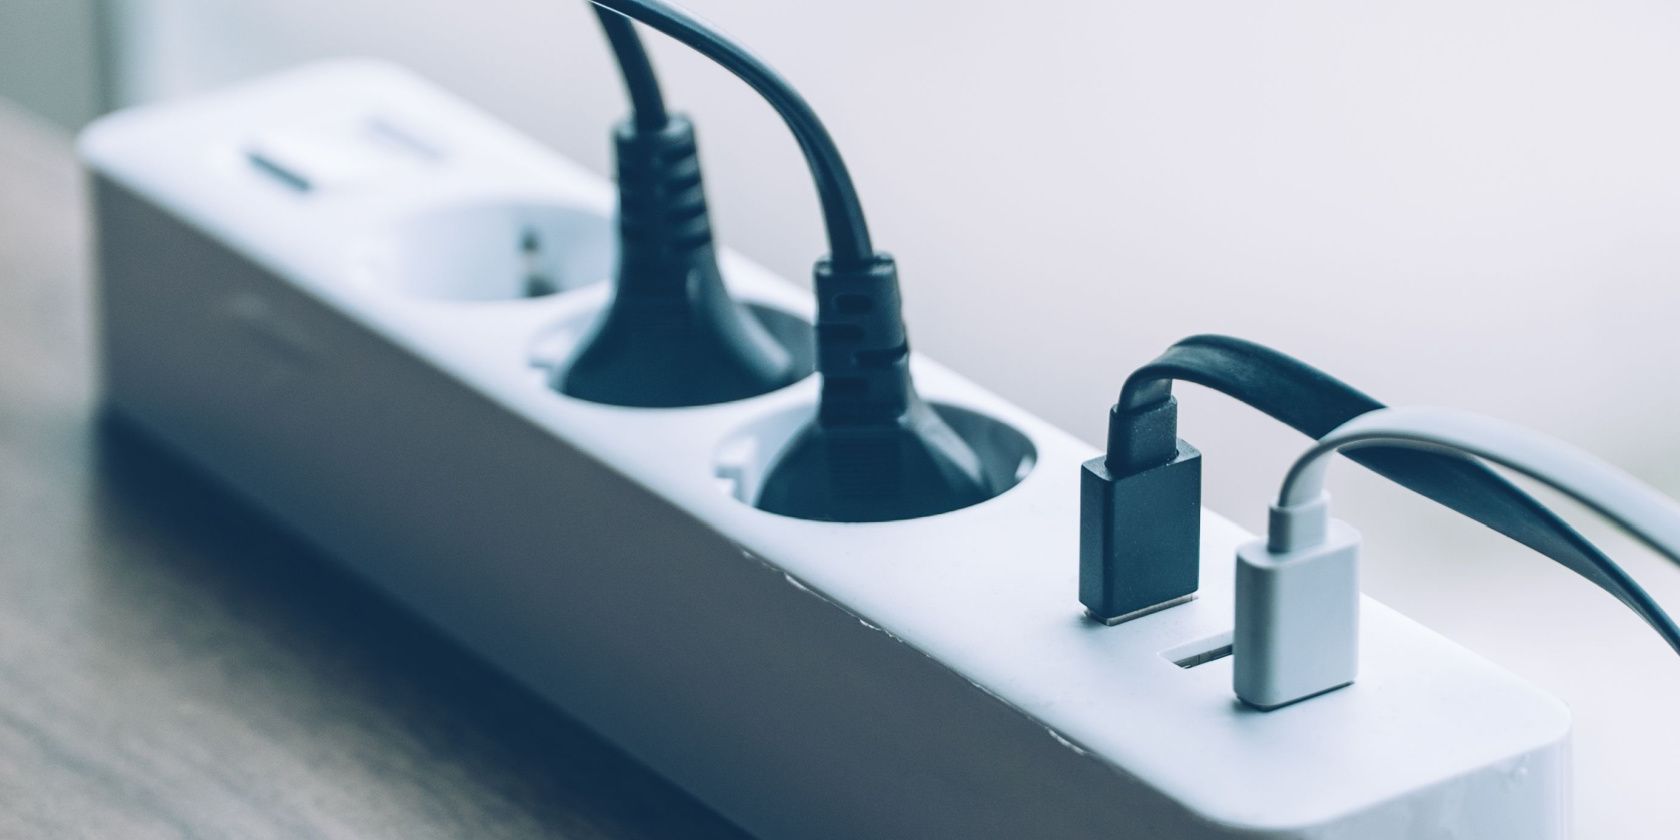 10 Best Smart Plugs and Power Strips of 2023